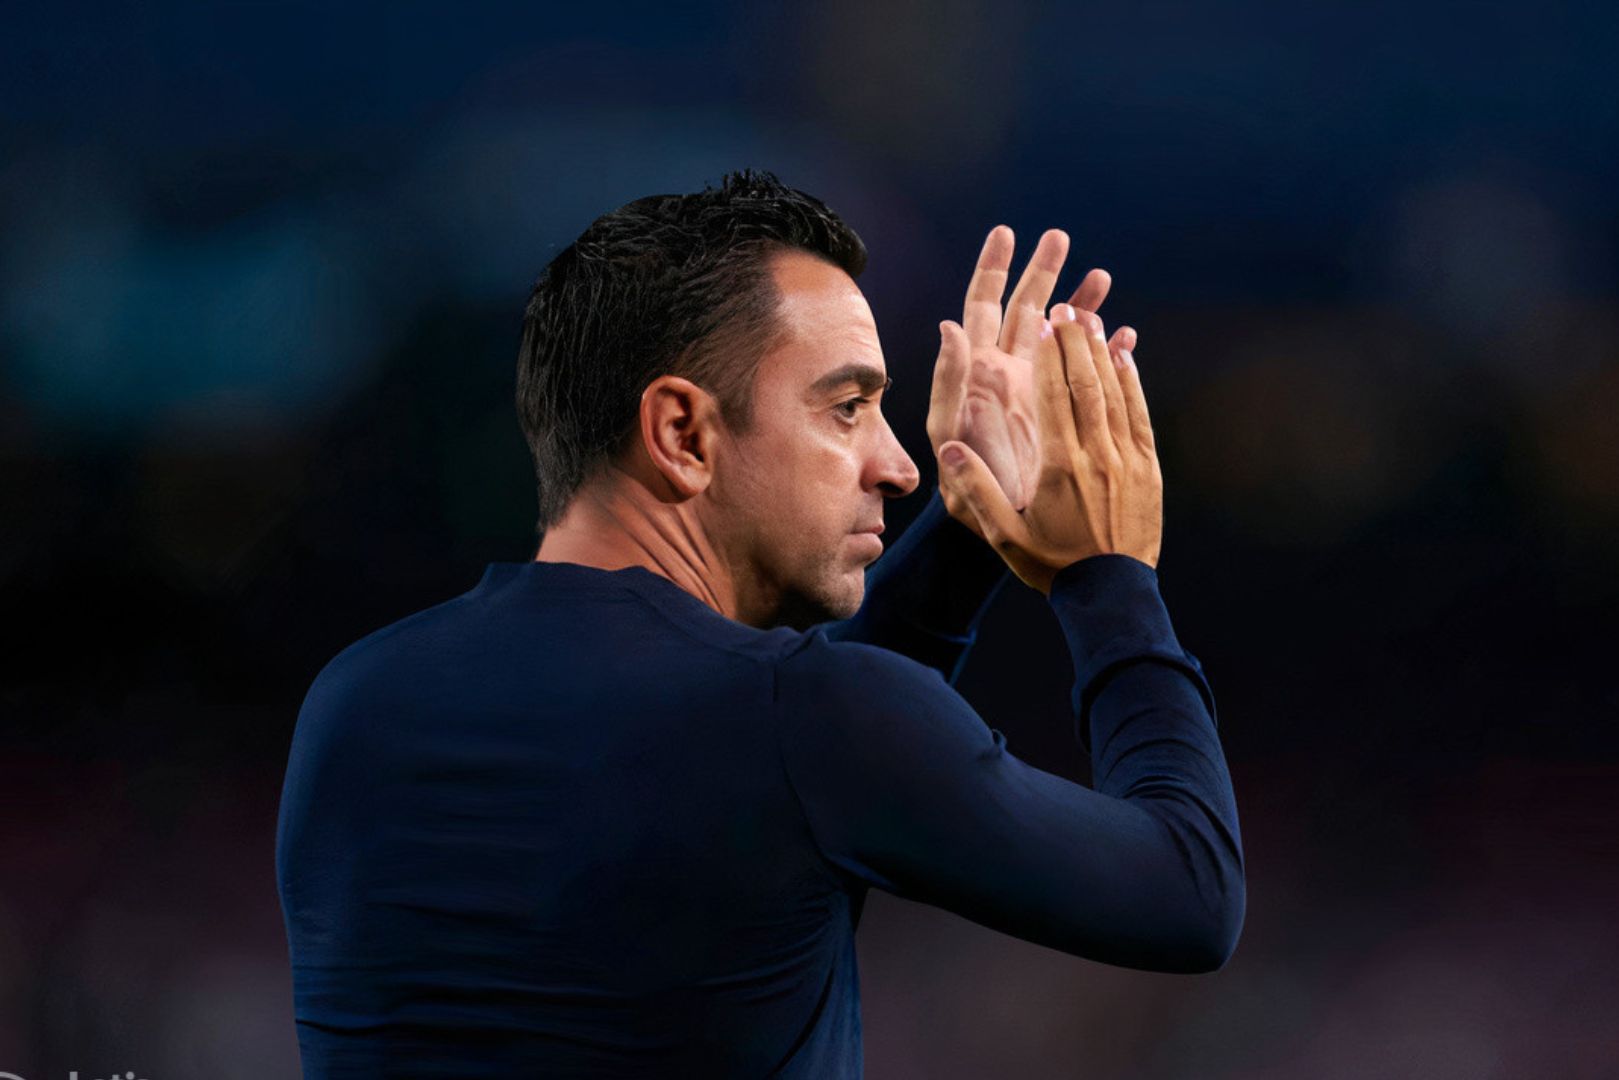 BARCELONA, SPAIN - OCTOBER 26: Xavi Hernandez, Manager of FC Barcelona applauds the fans following their side's defeat and elimination from the UEFA Champions League in the UEFA Champions League group C match between FC Barcelona and FC Bayern München at Spotify Camp Nou on October 26, 2022 in Barcelona, Spain.